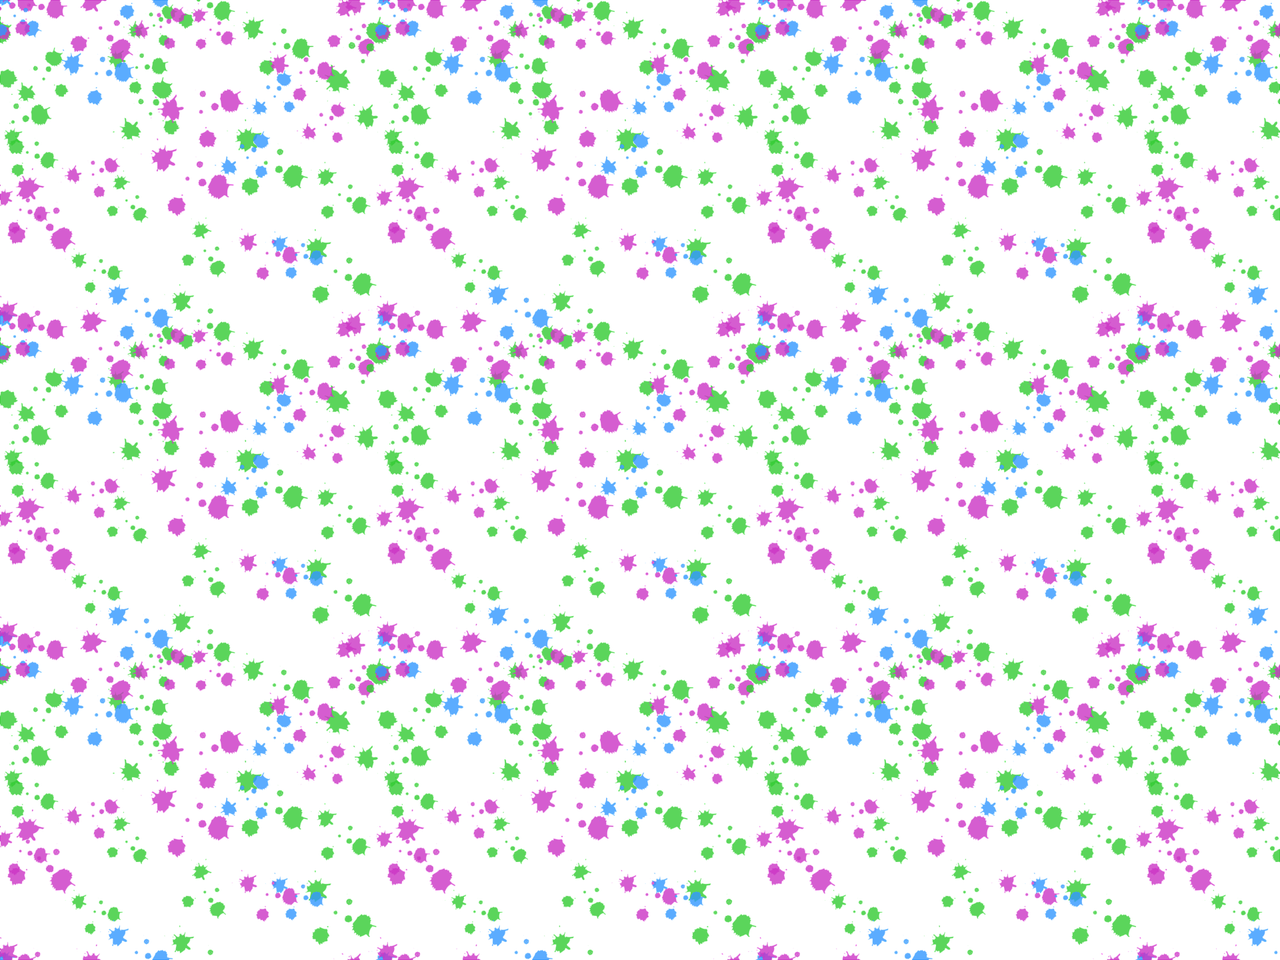 Pattern Confetti Background Free Vector Graphics Free Pictures Free Image From Needpix Com